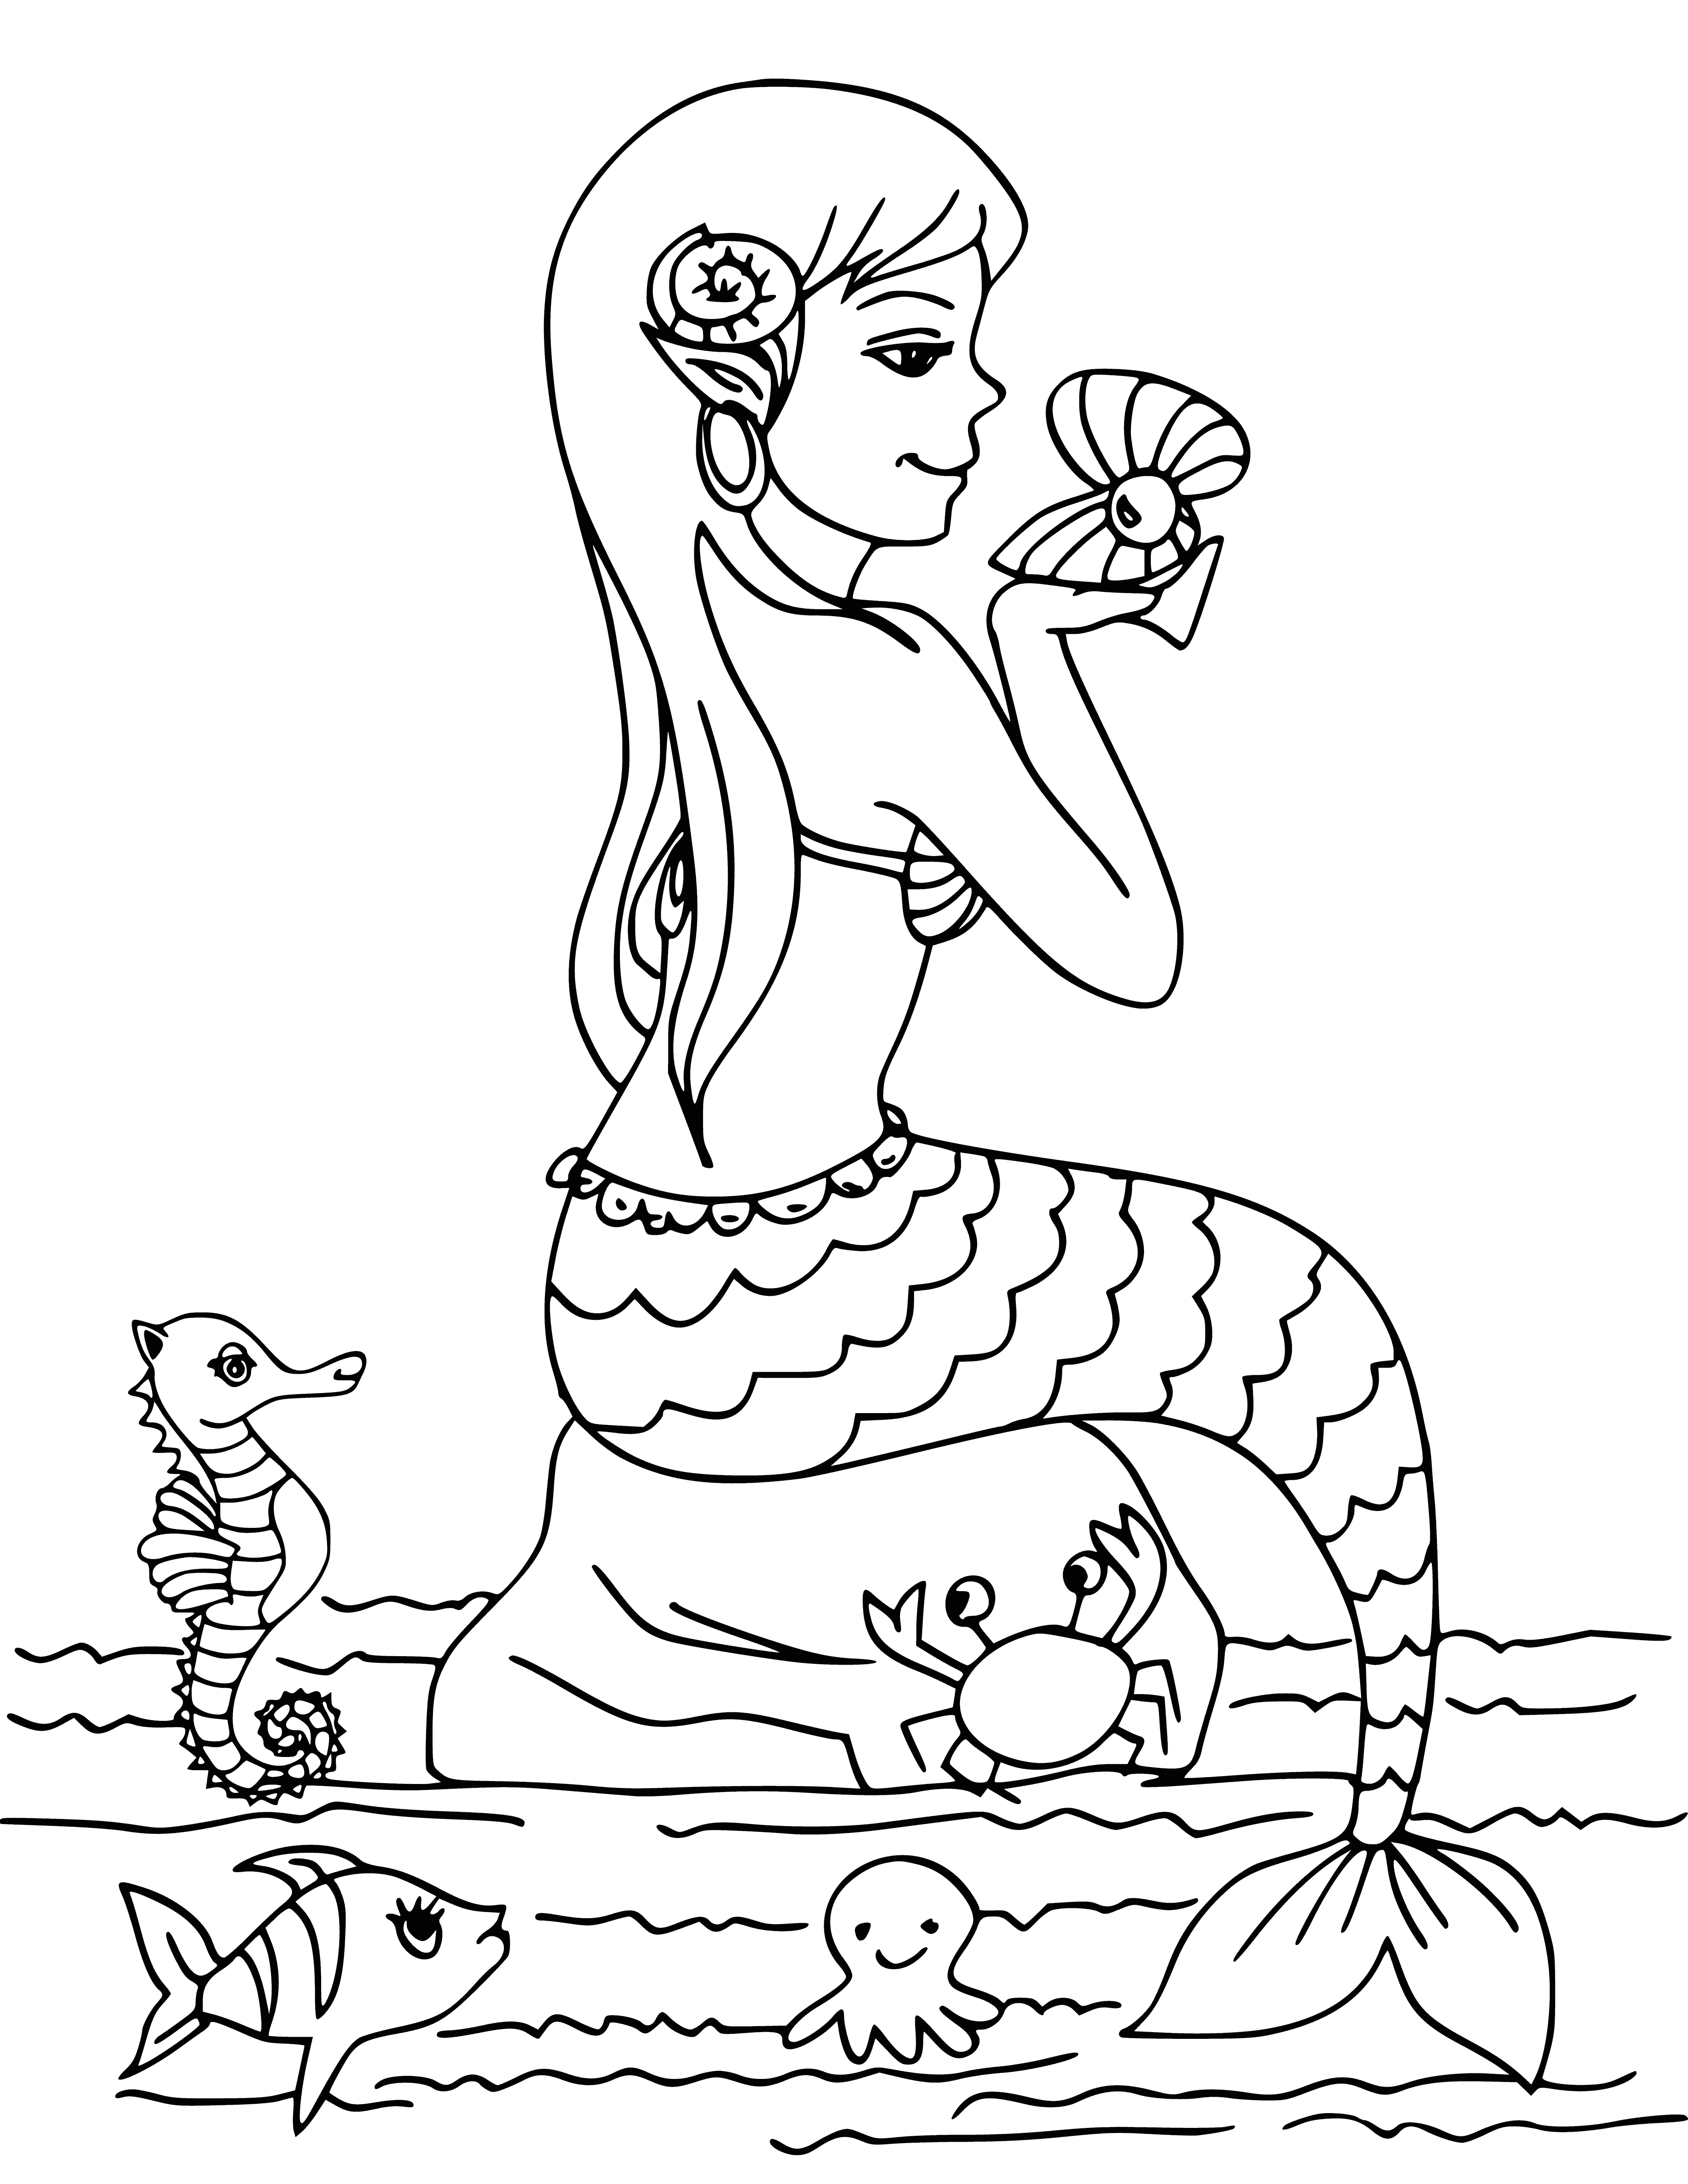 coloring page: Peaceful mermaid with pearl sits on rock in calm ocean; blonde hair & tail of fishes make her serene.